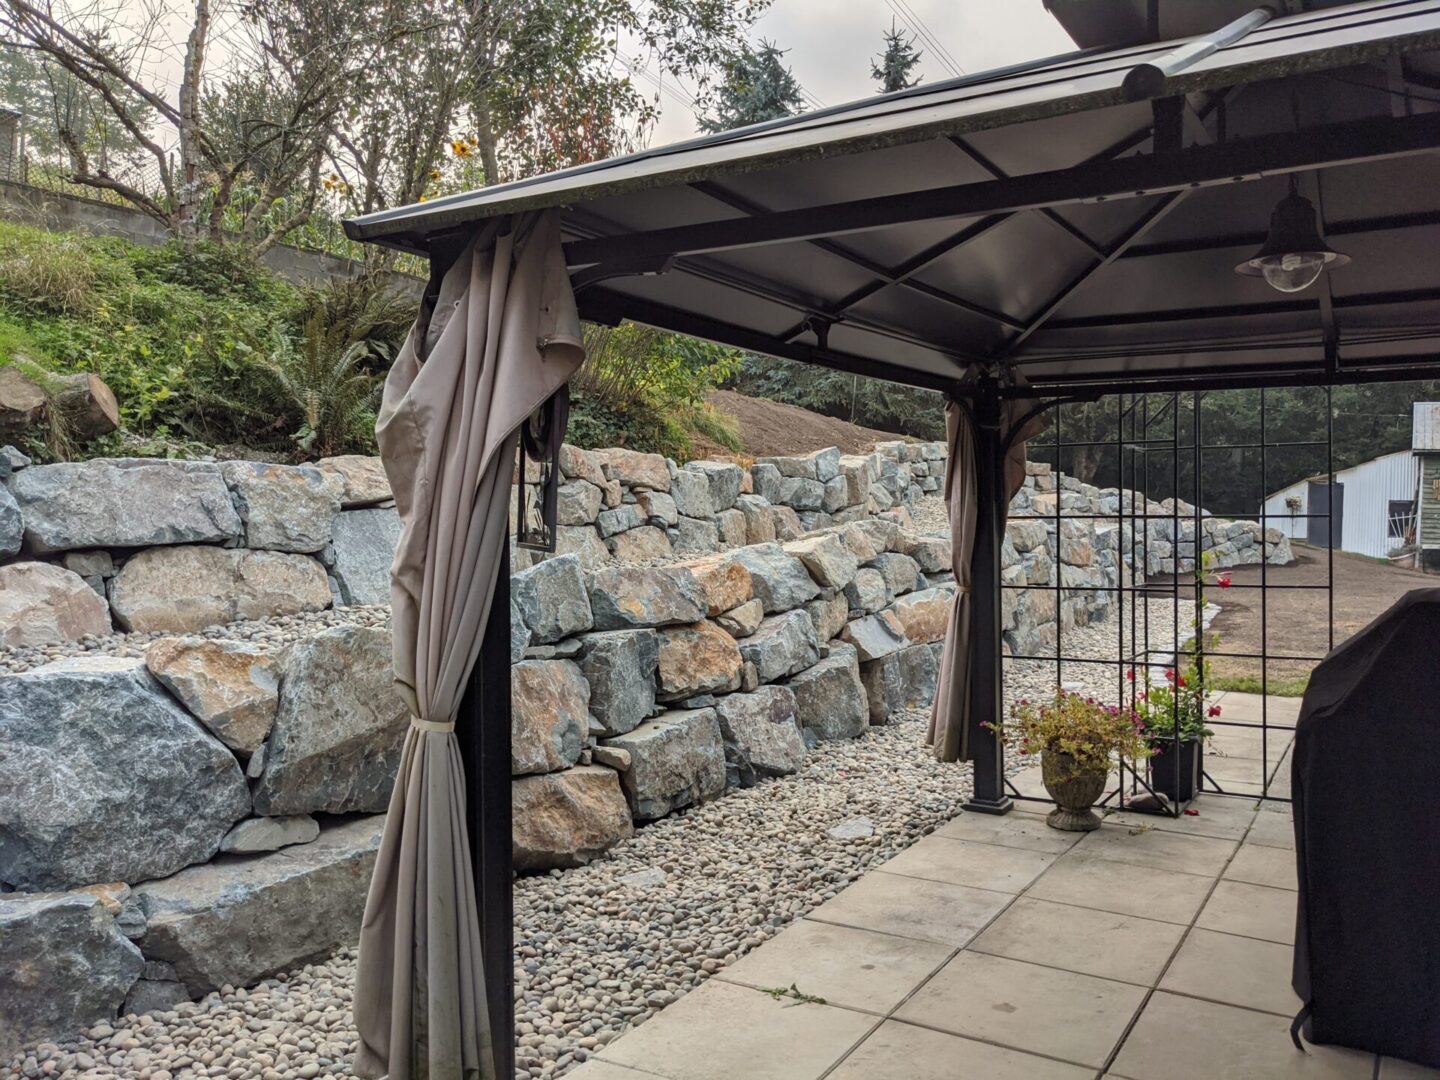 A gazebo with draped curtains on a gravel patio, adjacent to a rock retaining wall with plants and trees in the background.